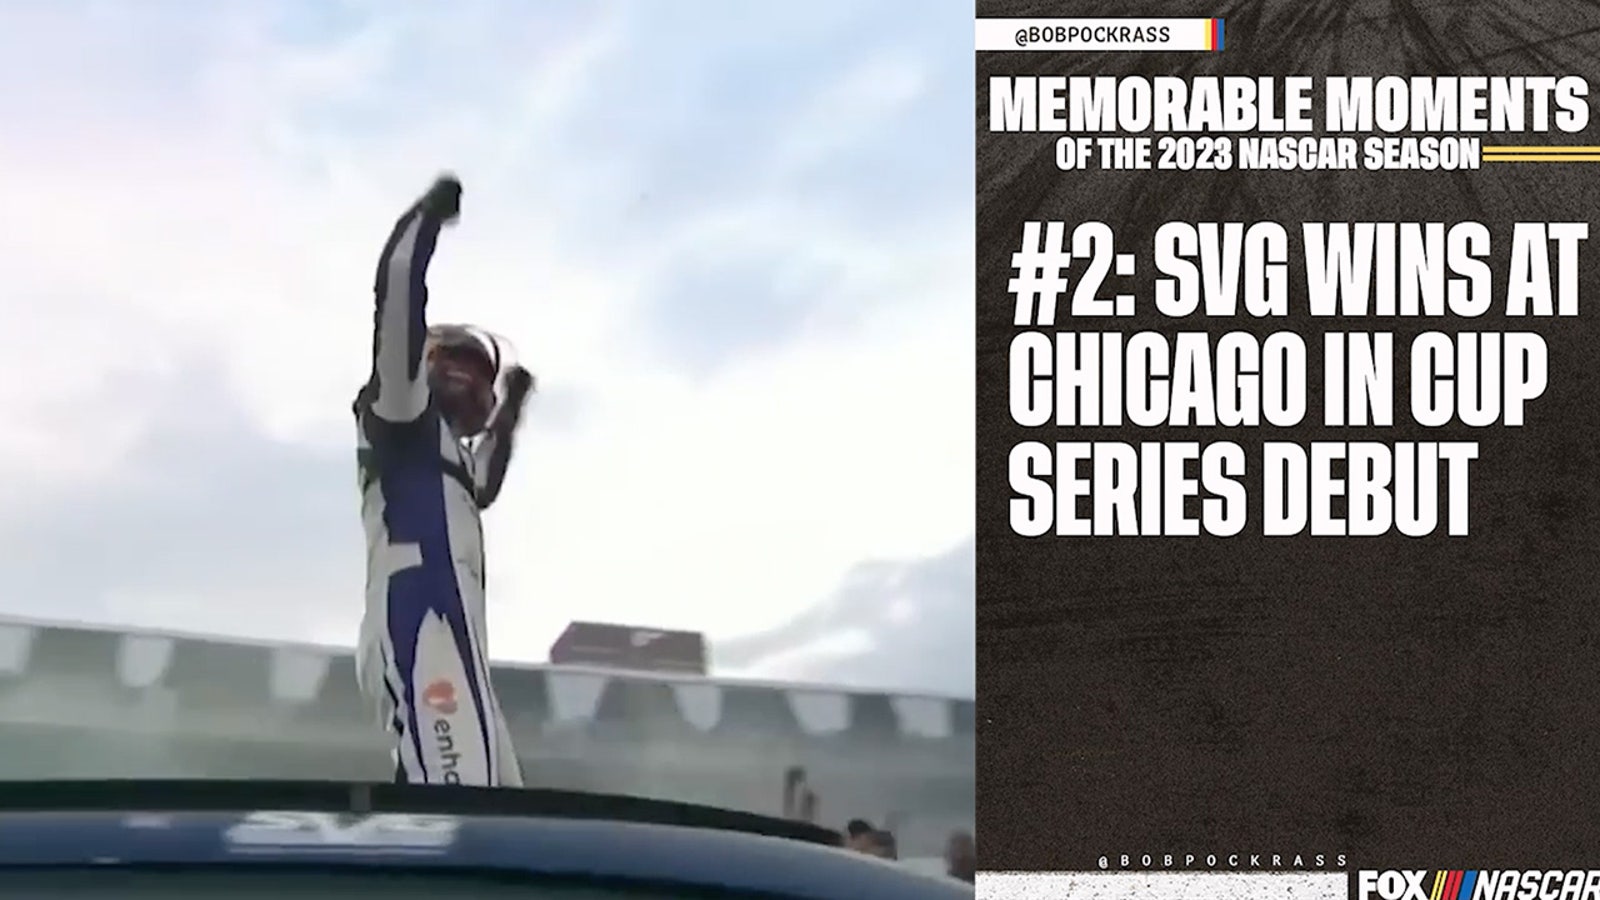 SVG Wins At Chicago In Cup Series Debut | Most Memorable Moments of 2023 NASCAR Season